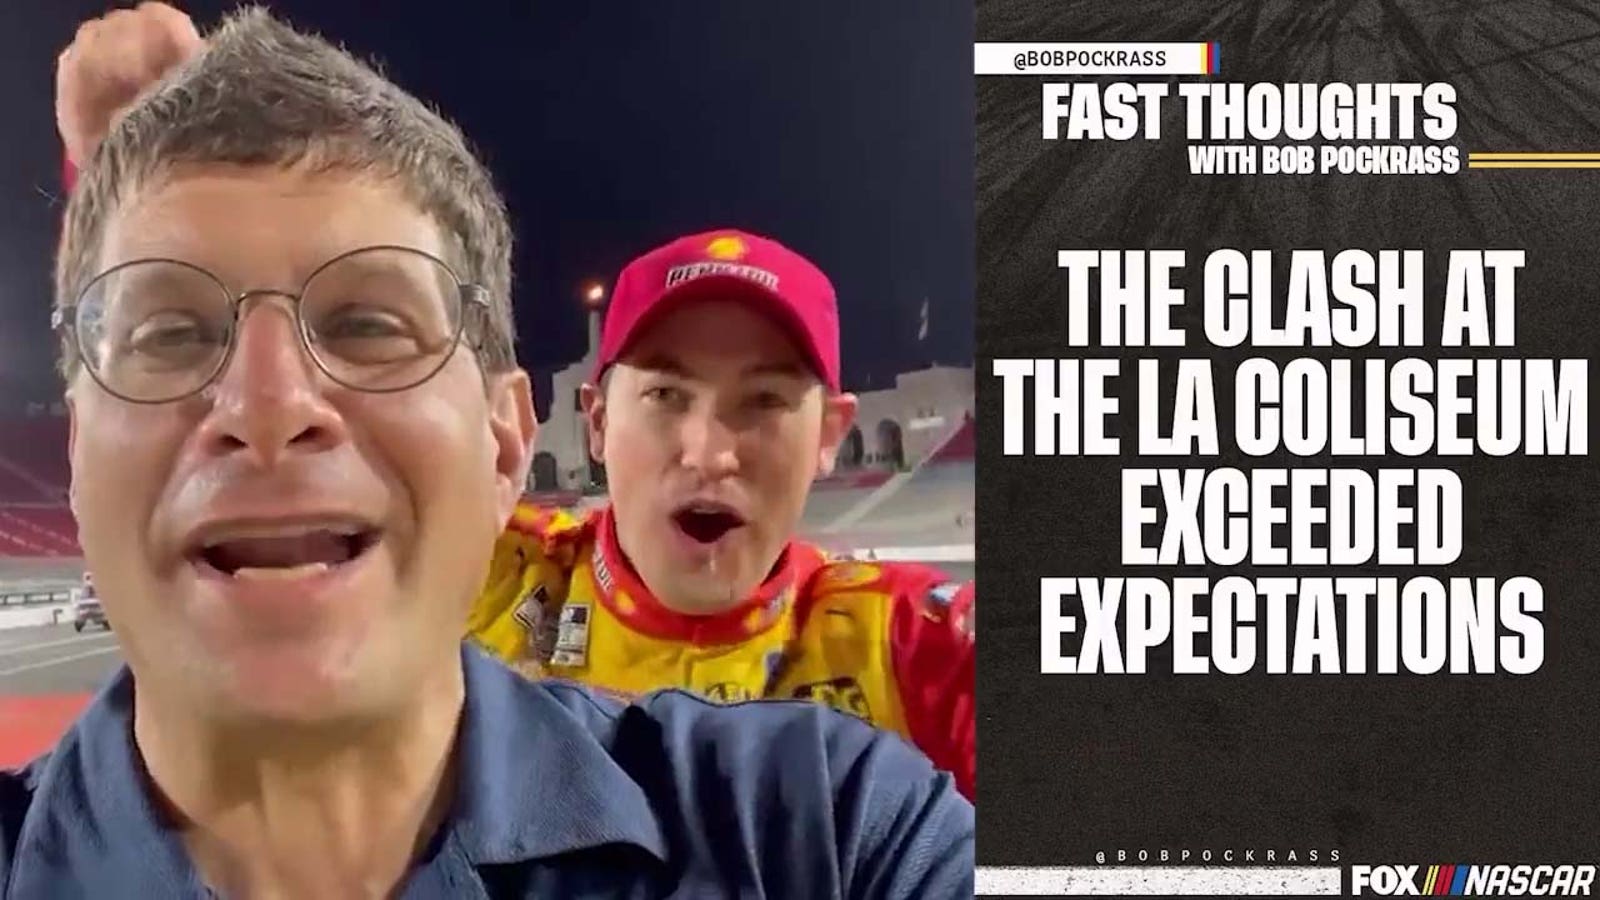 Bob Pockrass on the Clash at the Coliseum